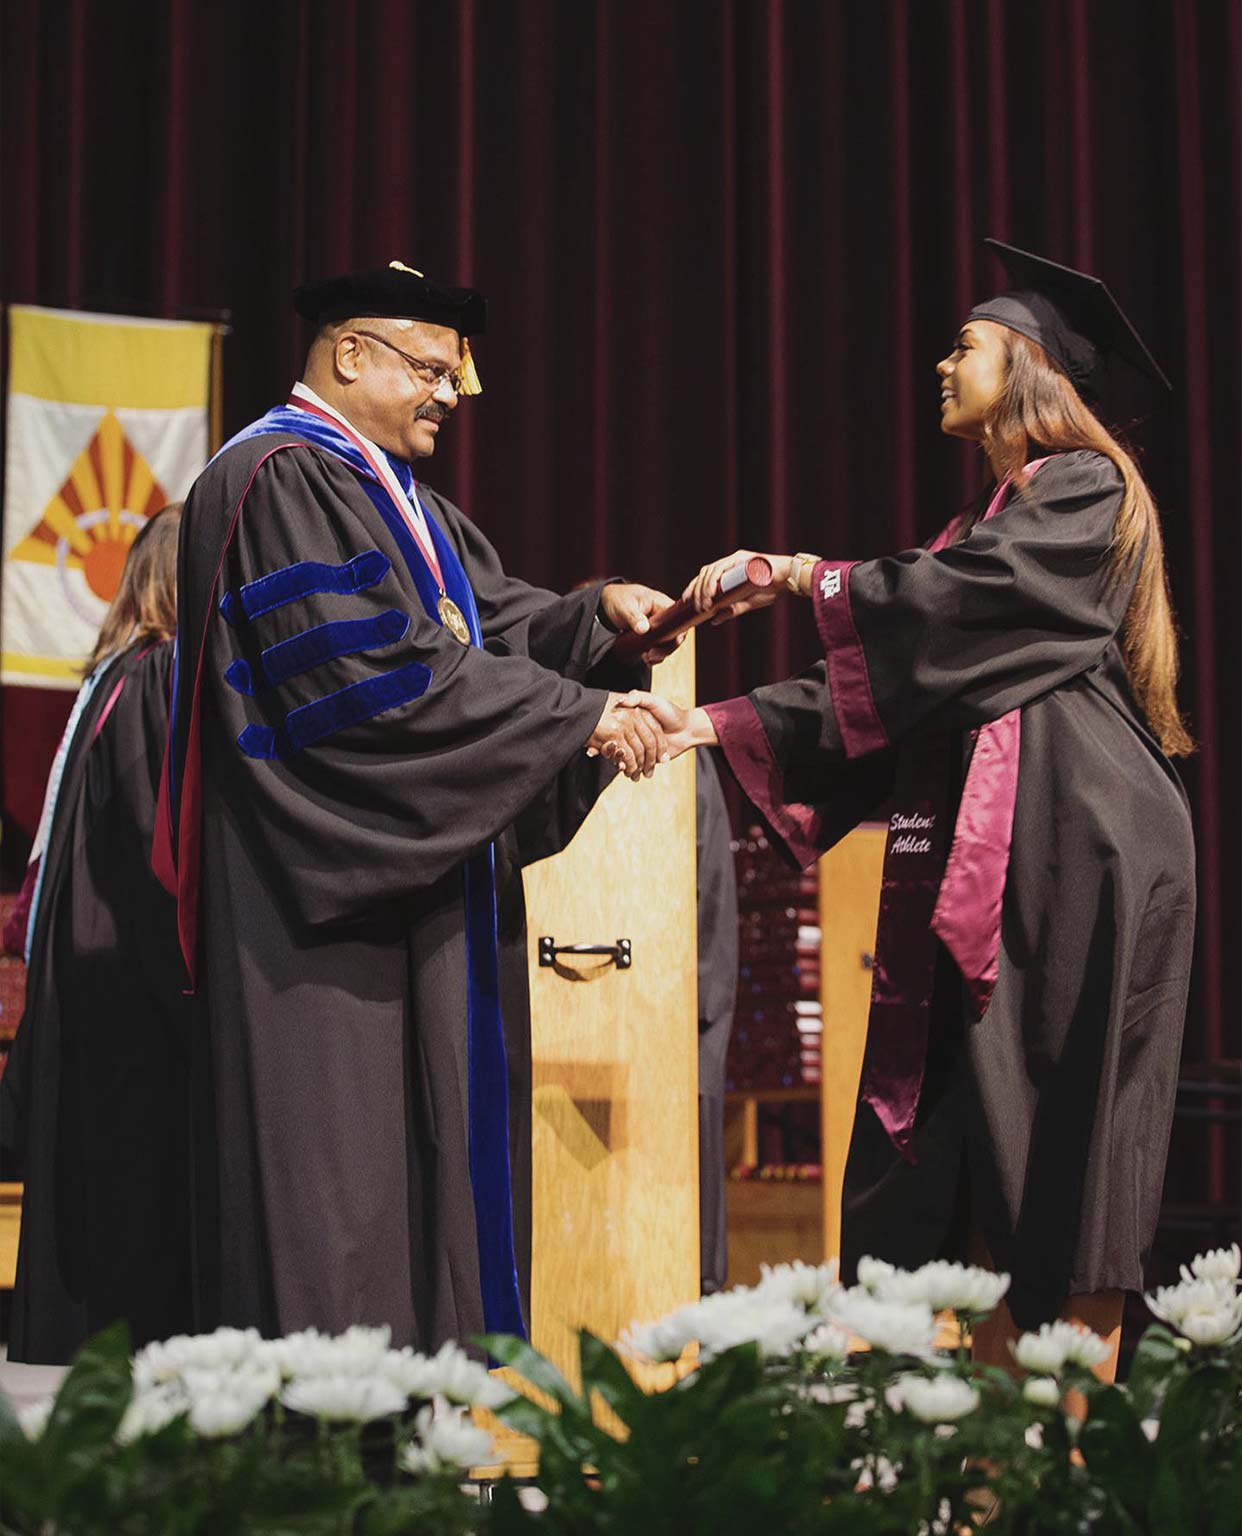 Ally Watt accepting her degree on stage during graduation